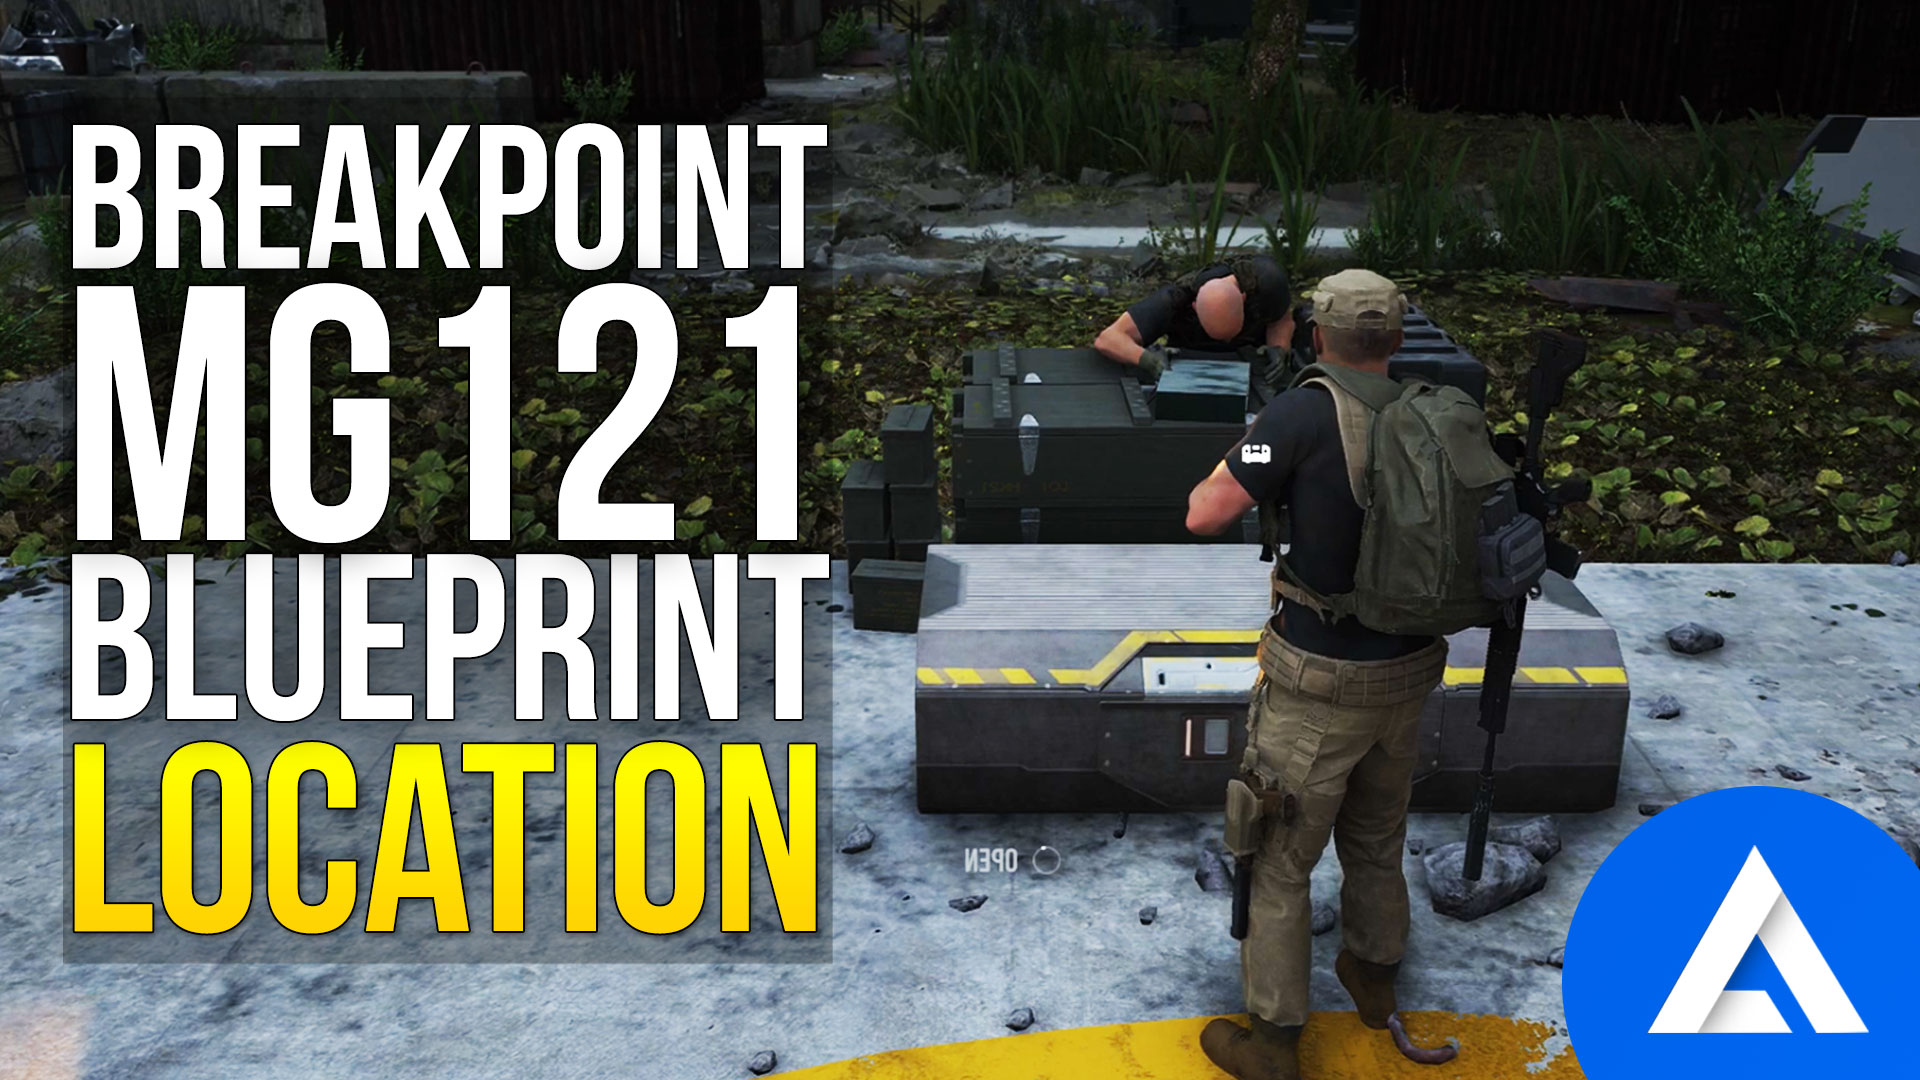 Breakpoint MG121 Blueprint Location